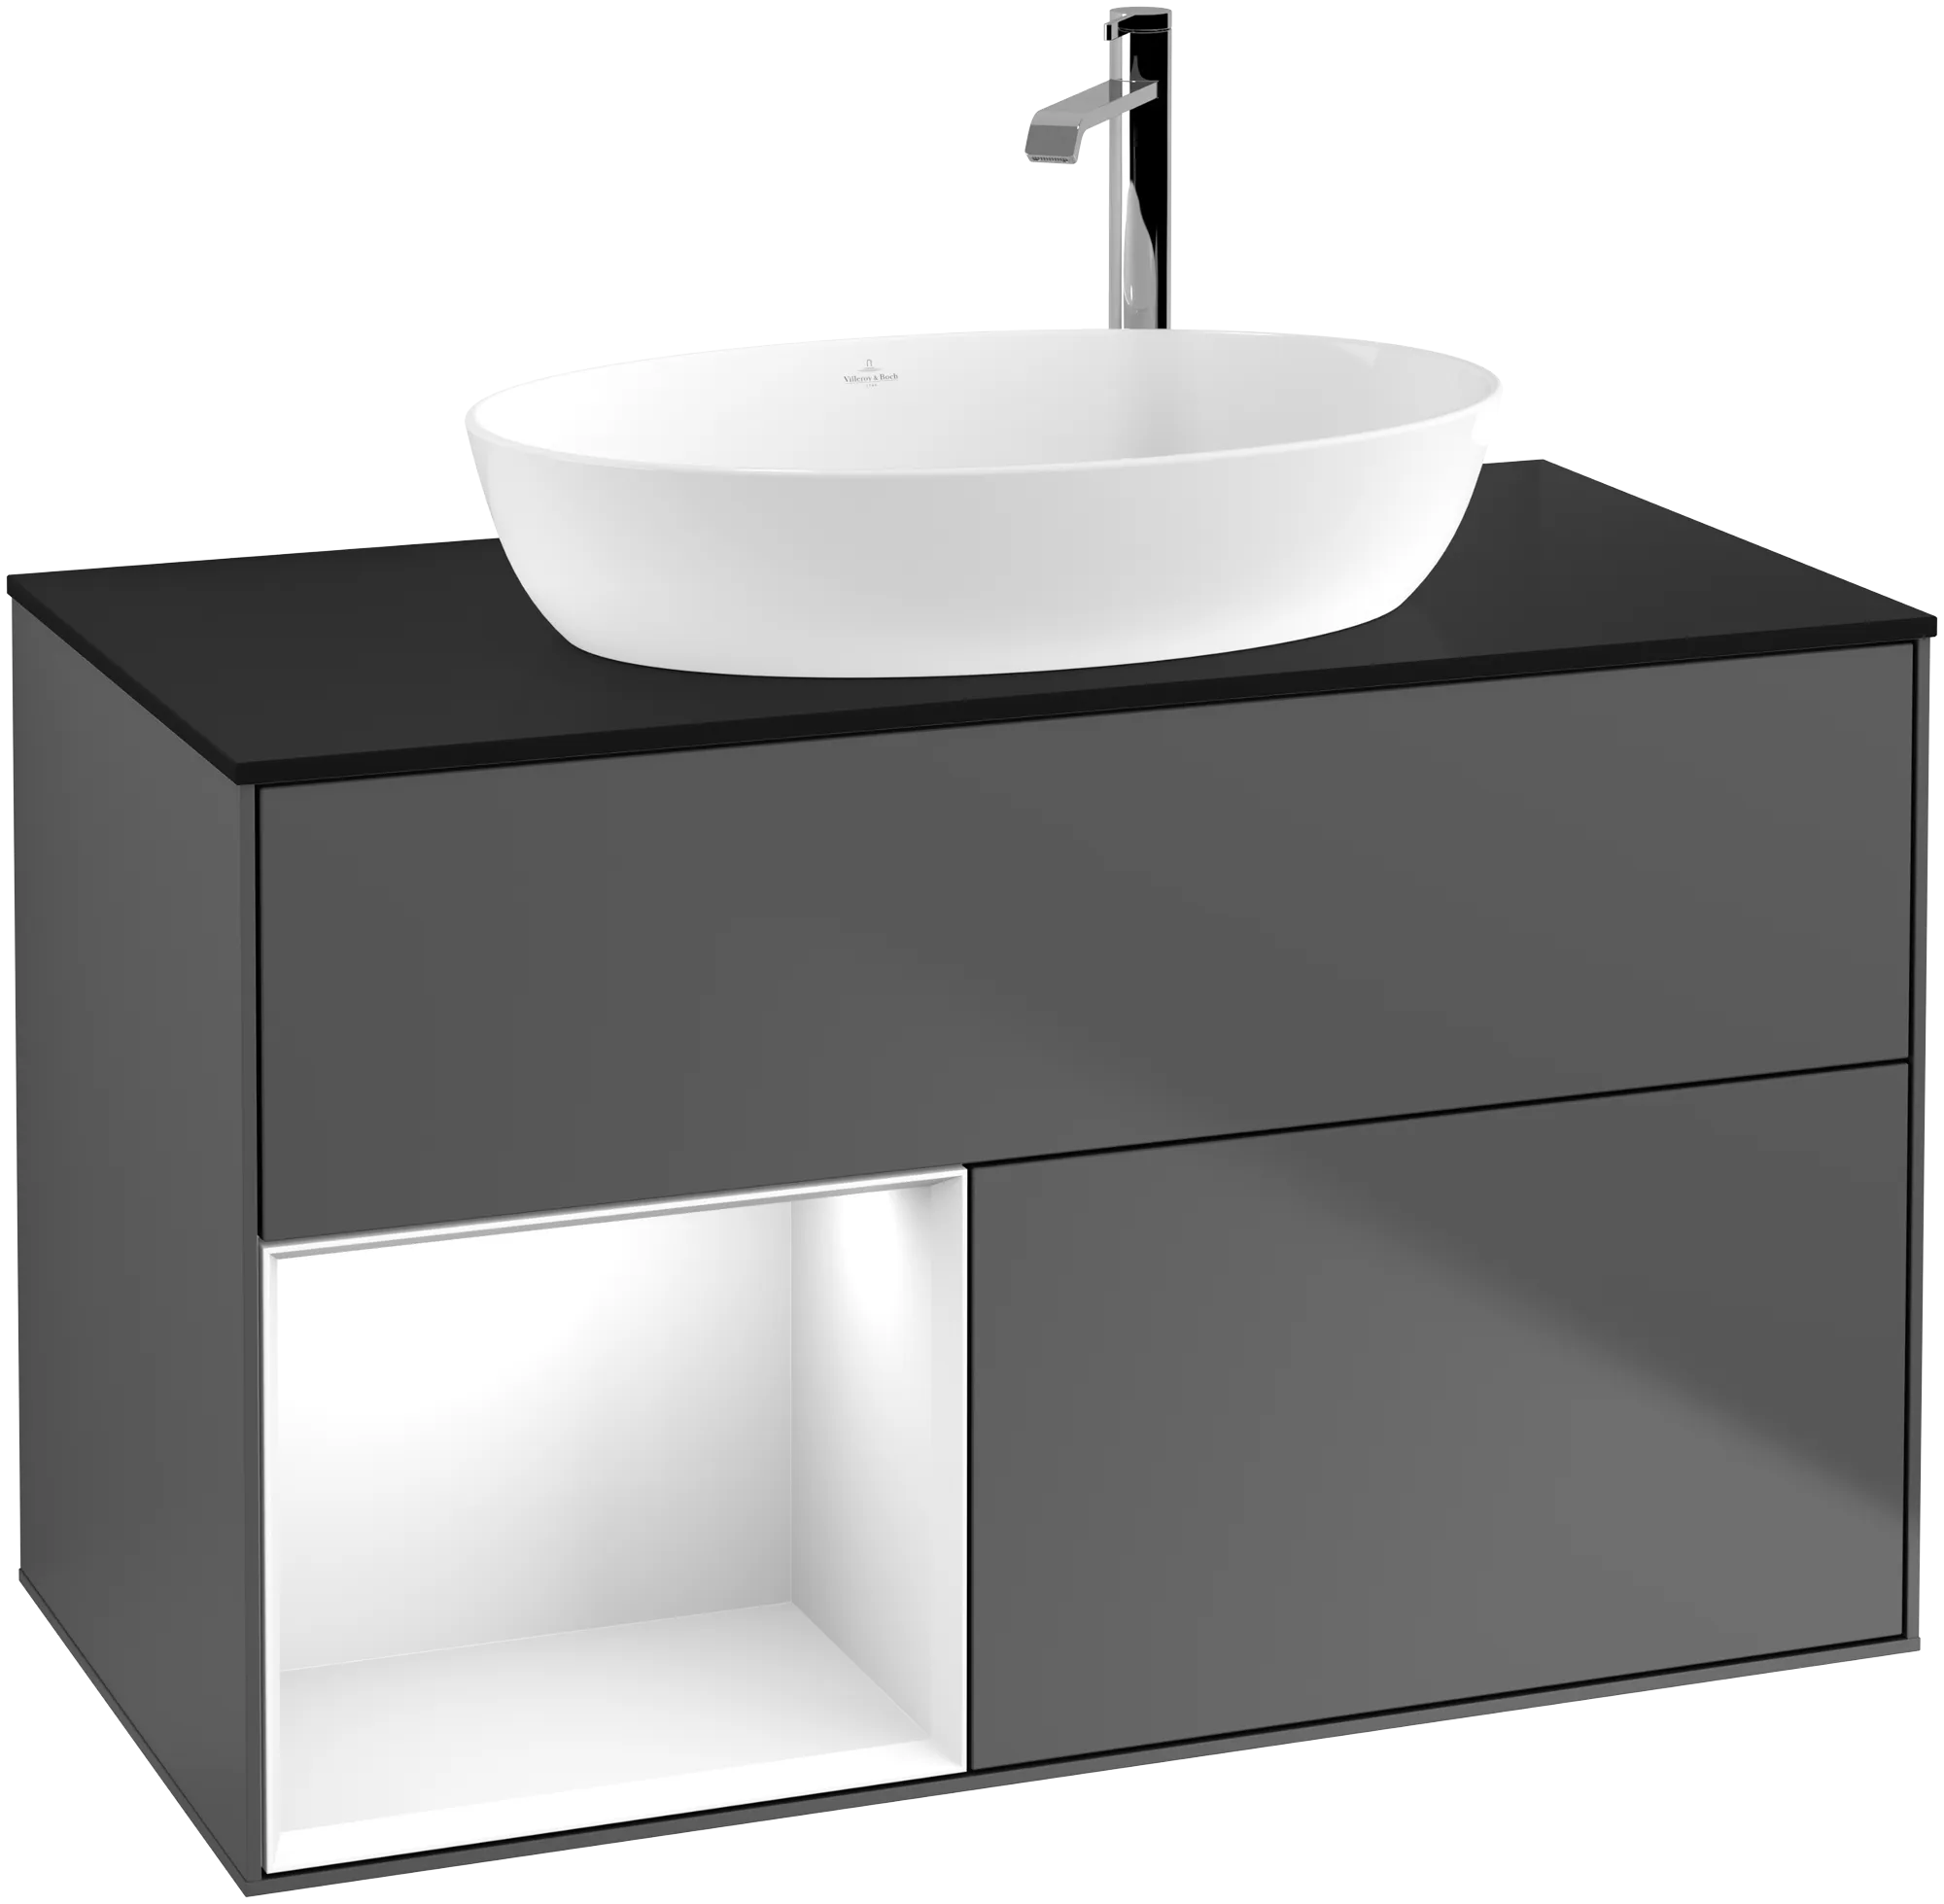 VILLEROY BOCH Finion Vanity unit, with lighting, 2 pull-out compartments, 1000 x 603 x 501 mm, Anthracite Matt Lacquer / Glossy White Lacquer / Glass Black Matt #G892GFGK resmi